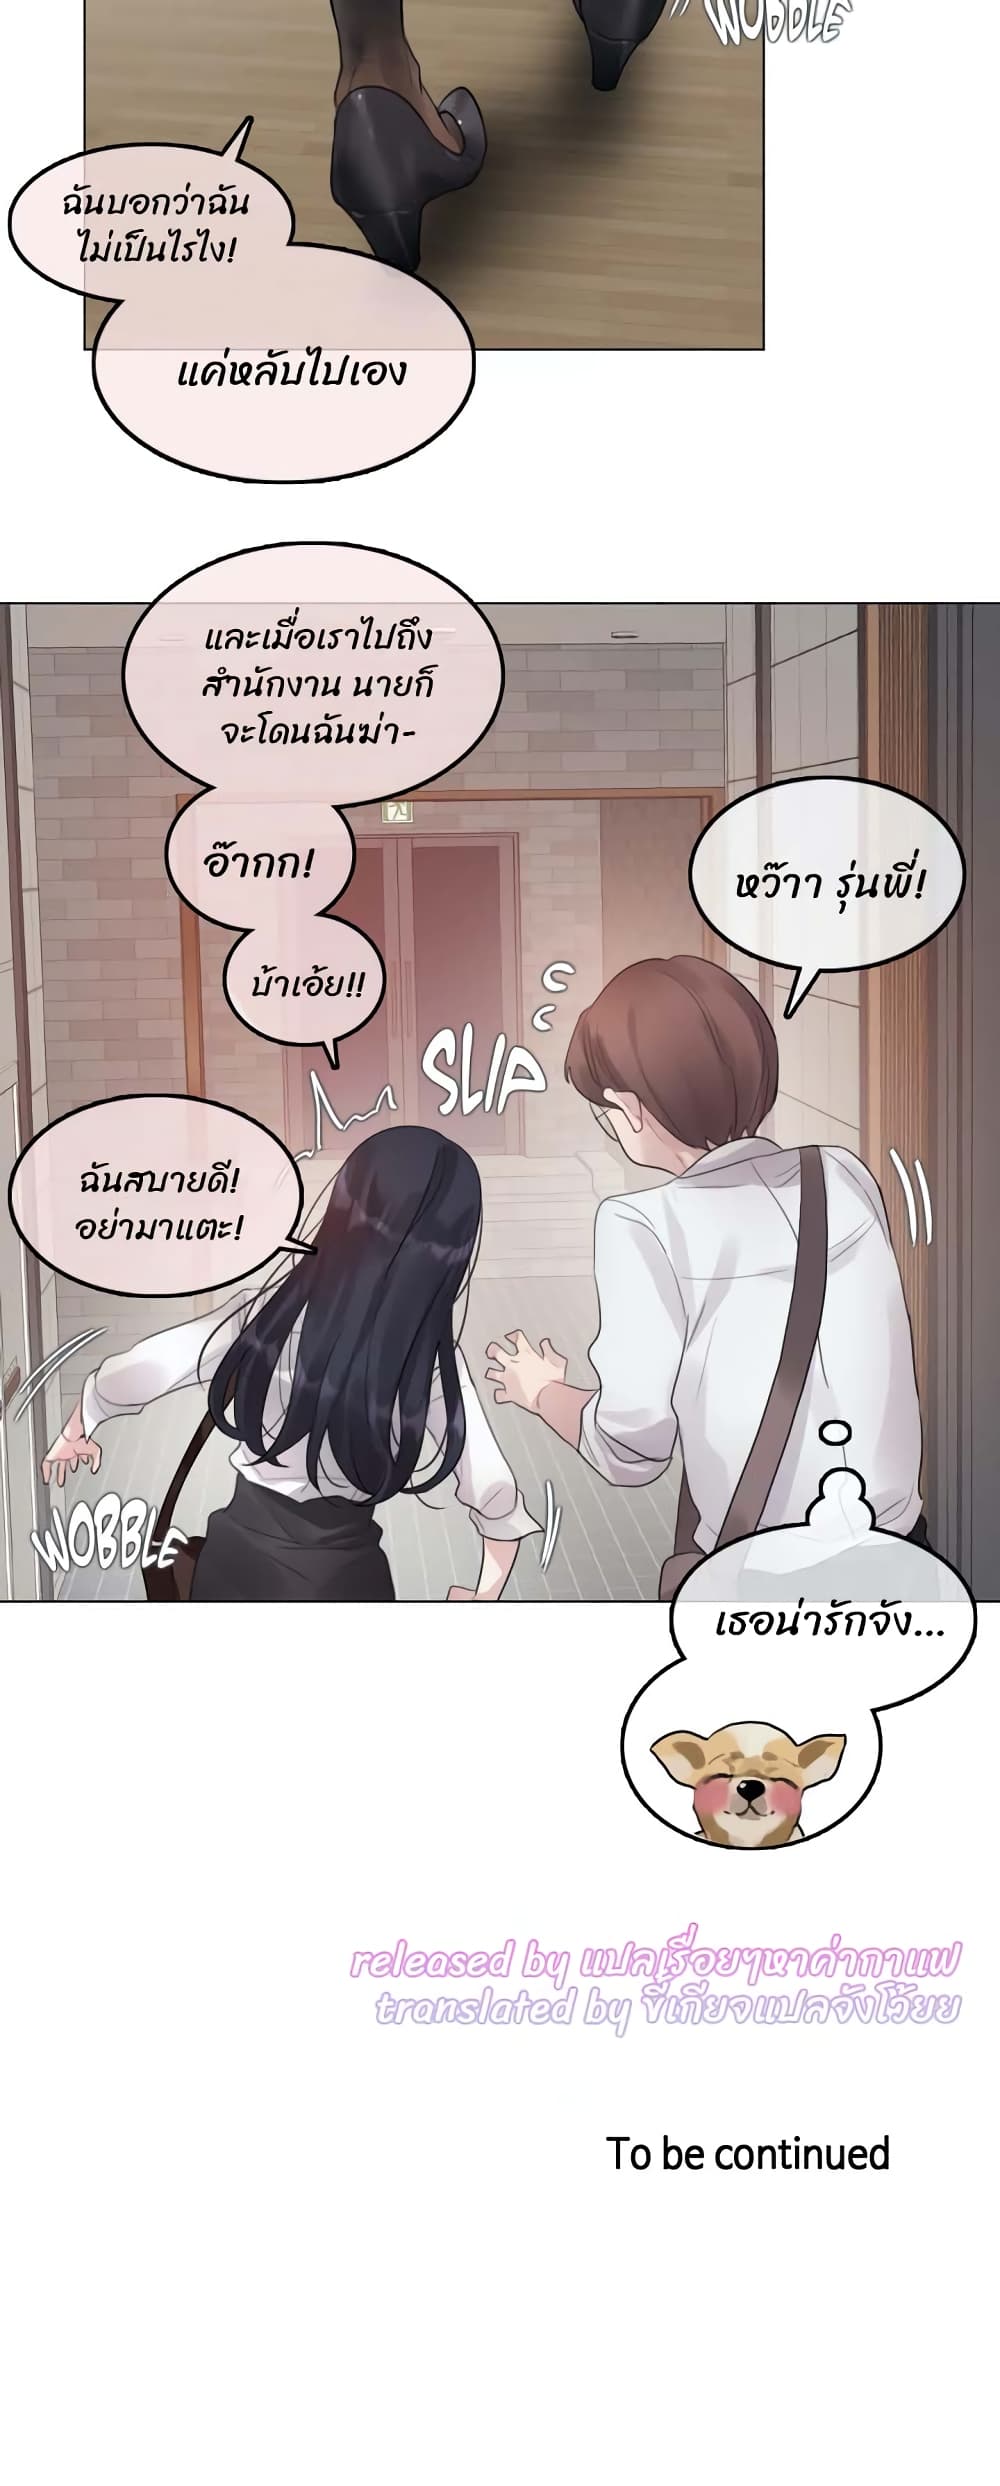 A Pervert's Daily Life 98 (24)